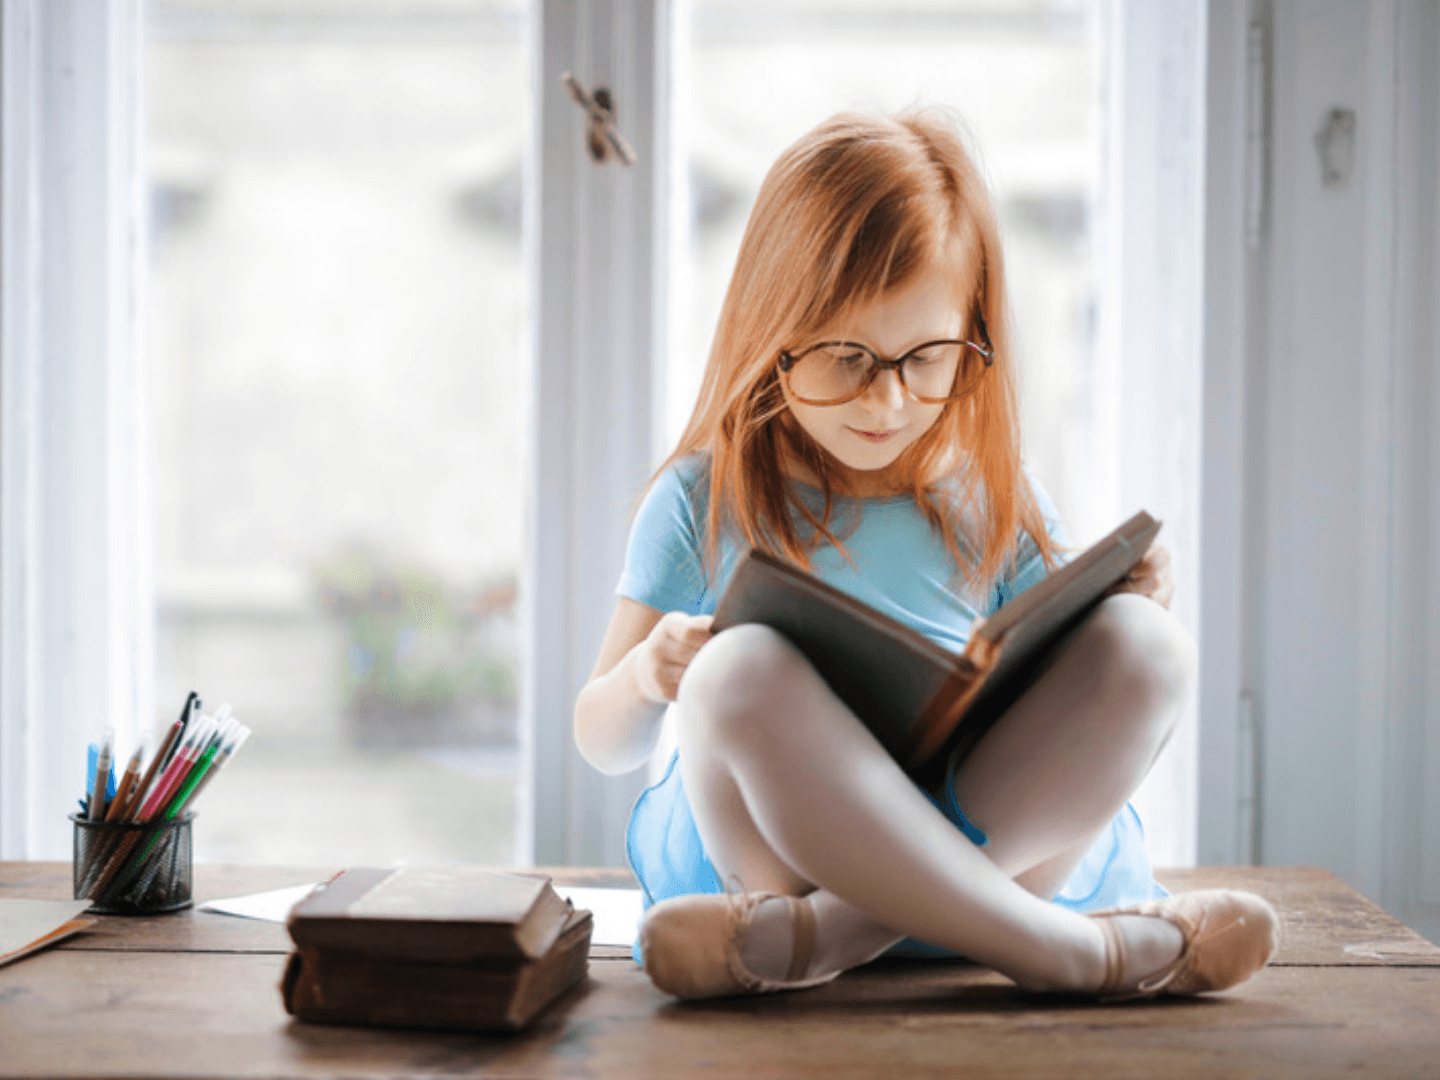 Child sitting by a window, independently reading at her own reading level.